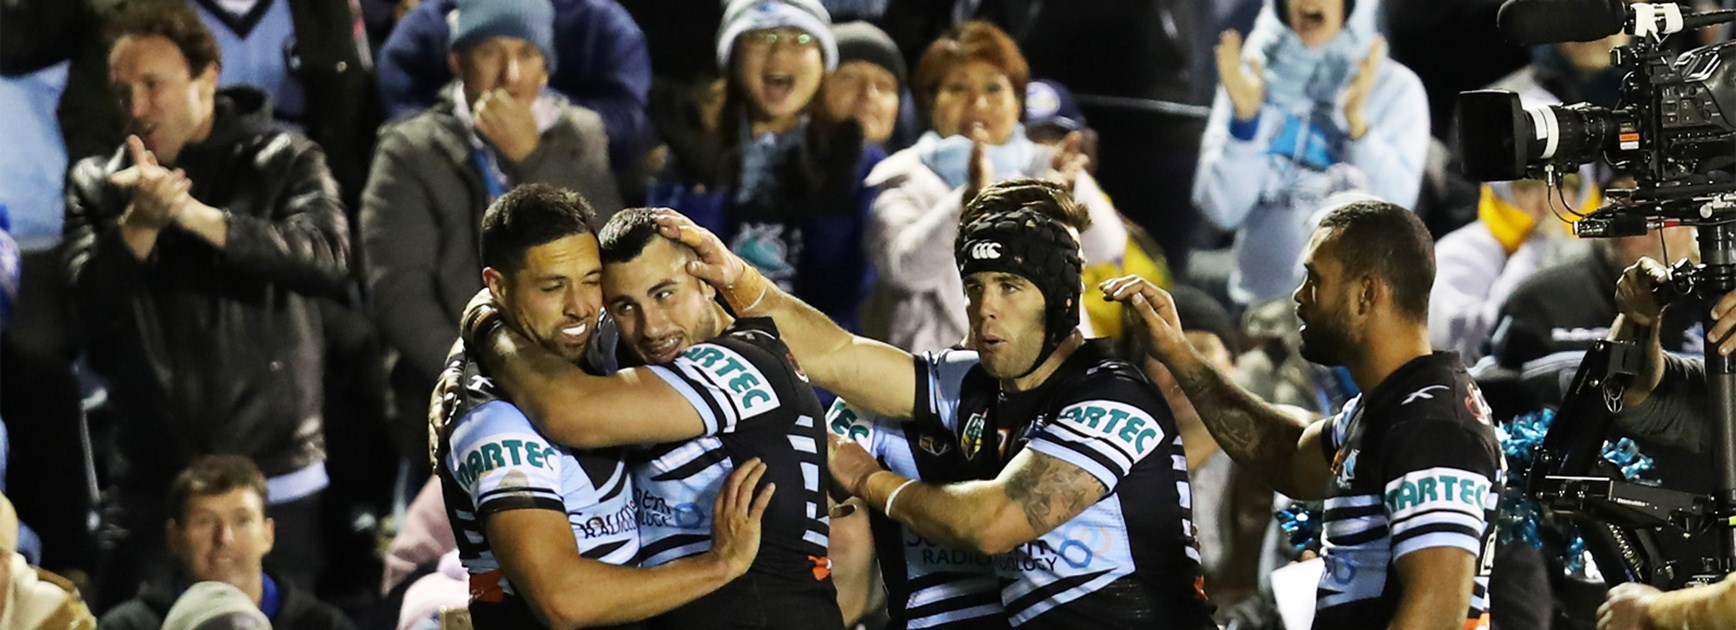 The Sharks celebrate a try against the Eels on Saturday.